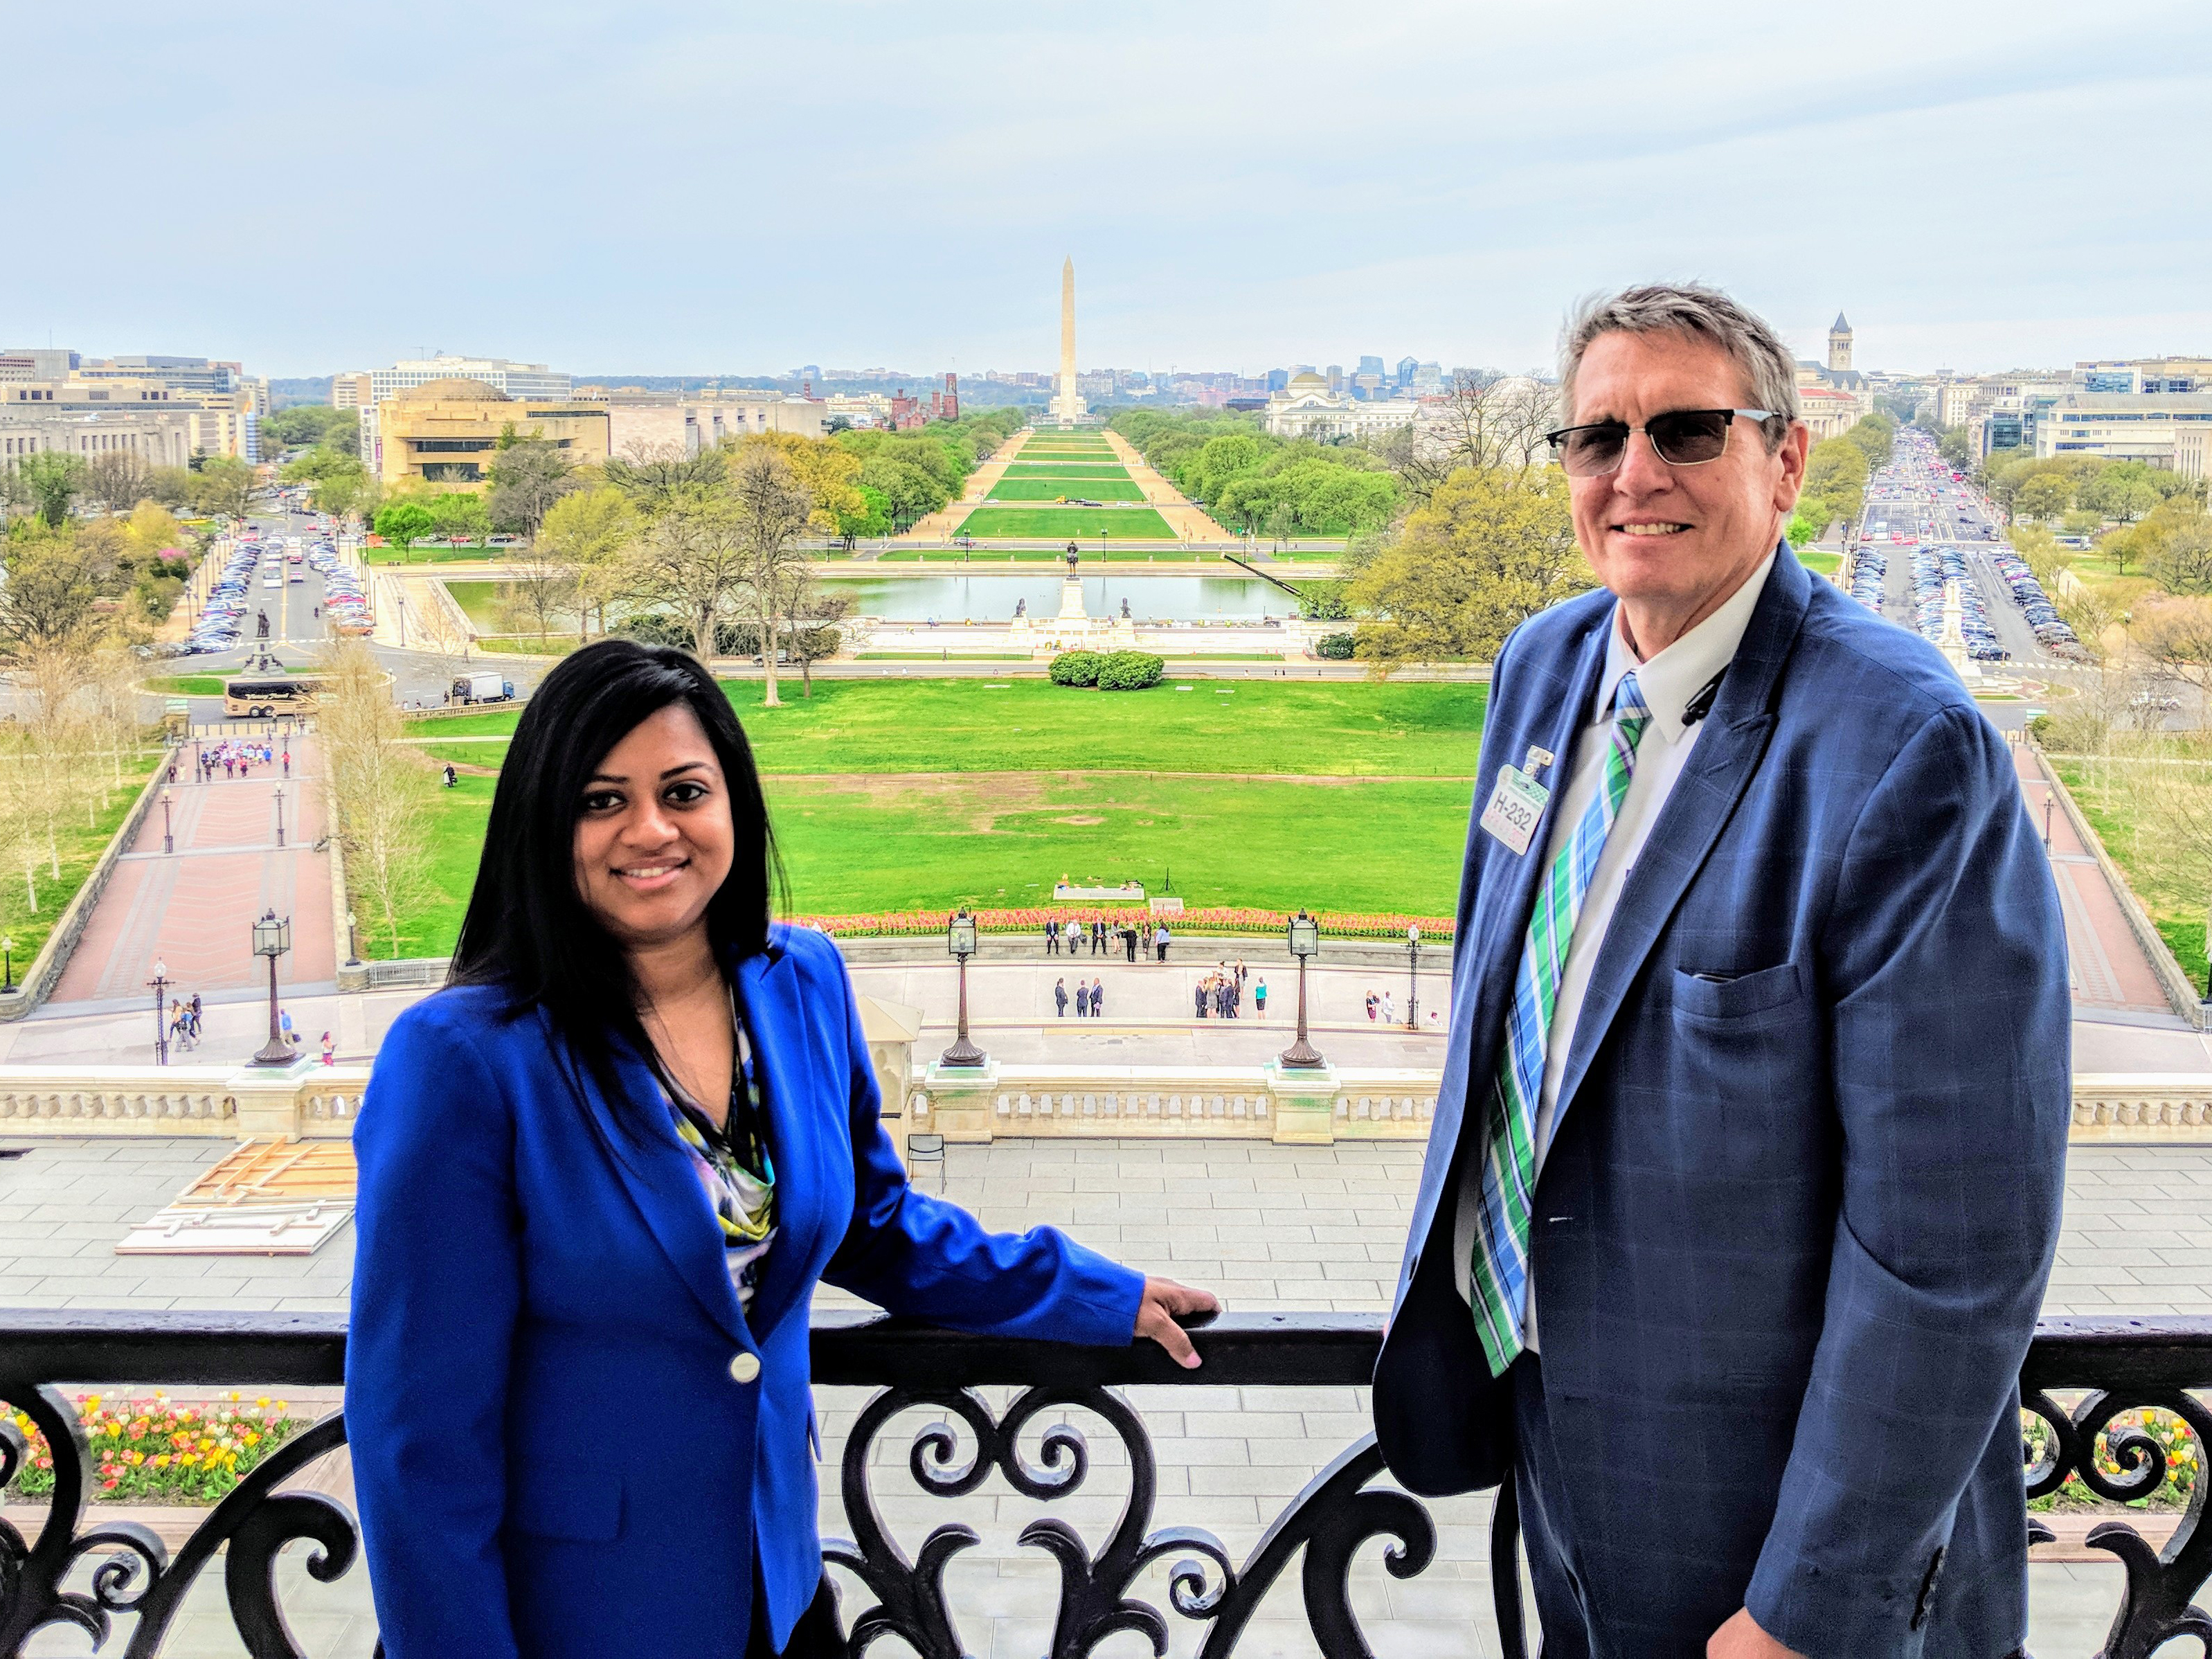 Sherleen Bose got the chance to view the National Mall from Speaker Nancy Pelosi’s balcony.